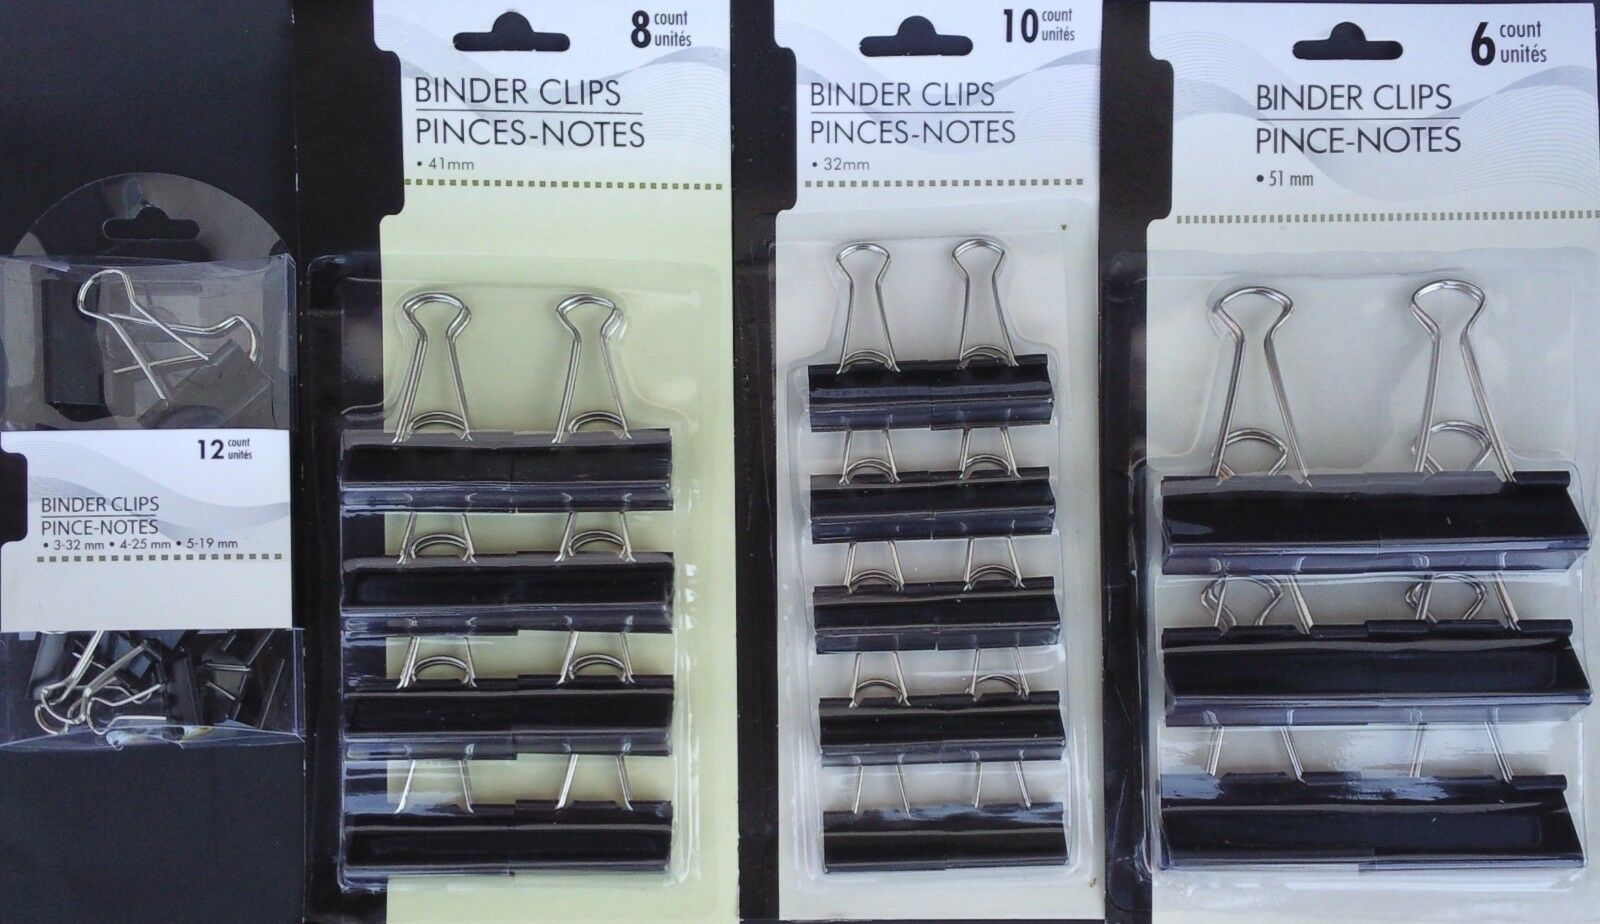 BINDER CLIPS Metal Spring Clamps, SELECT: 1.25" 1.5" or 2" - $2.99